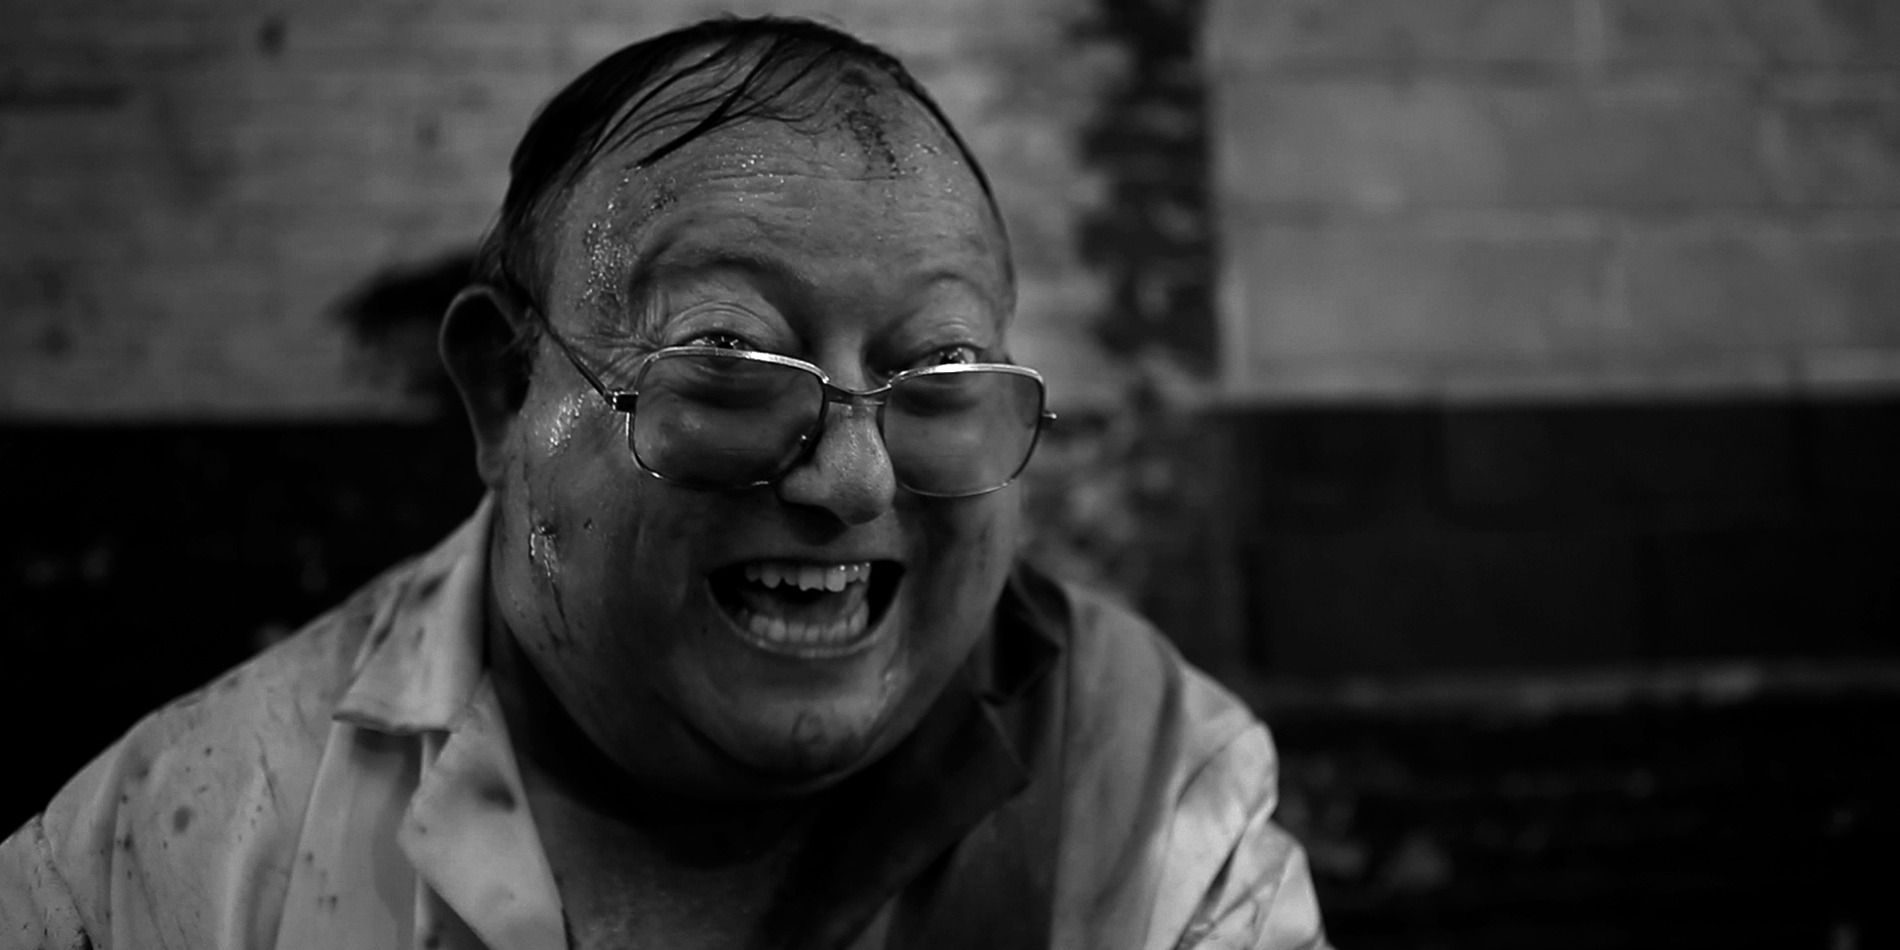 Laurence R. Harvey in 'The Human Centipede II', laughing maniacally